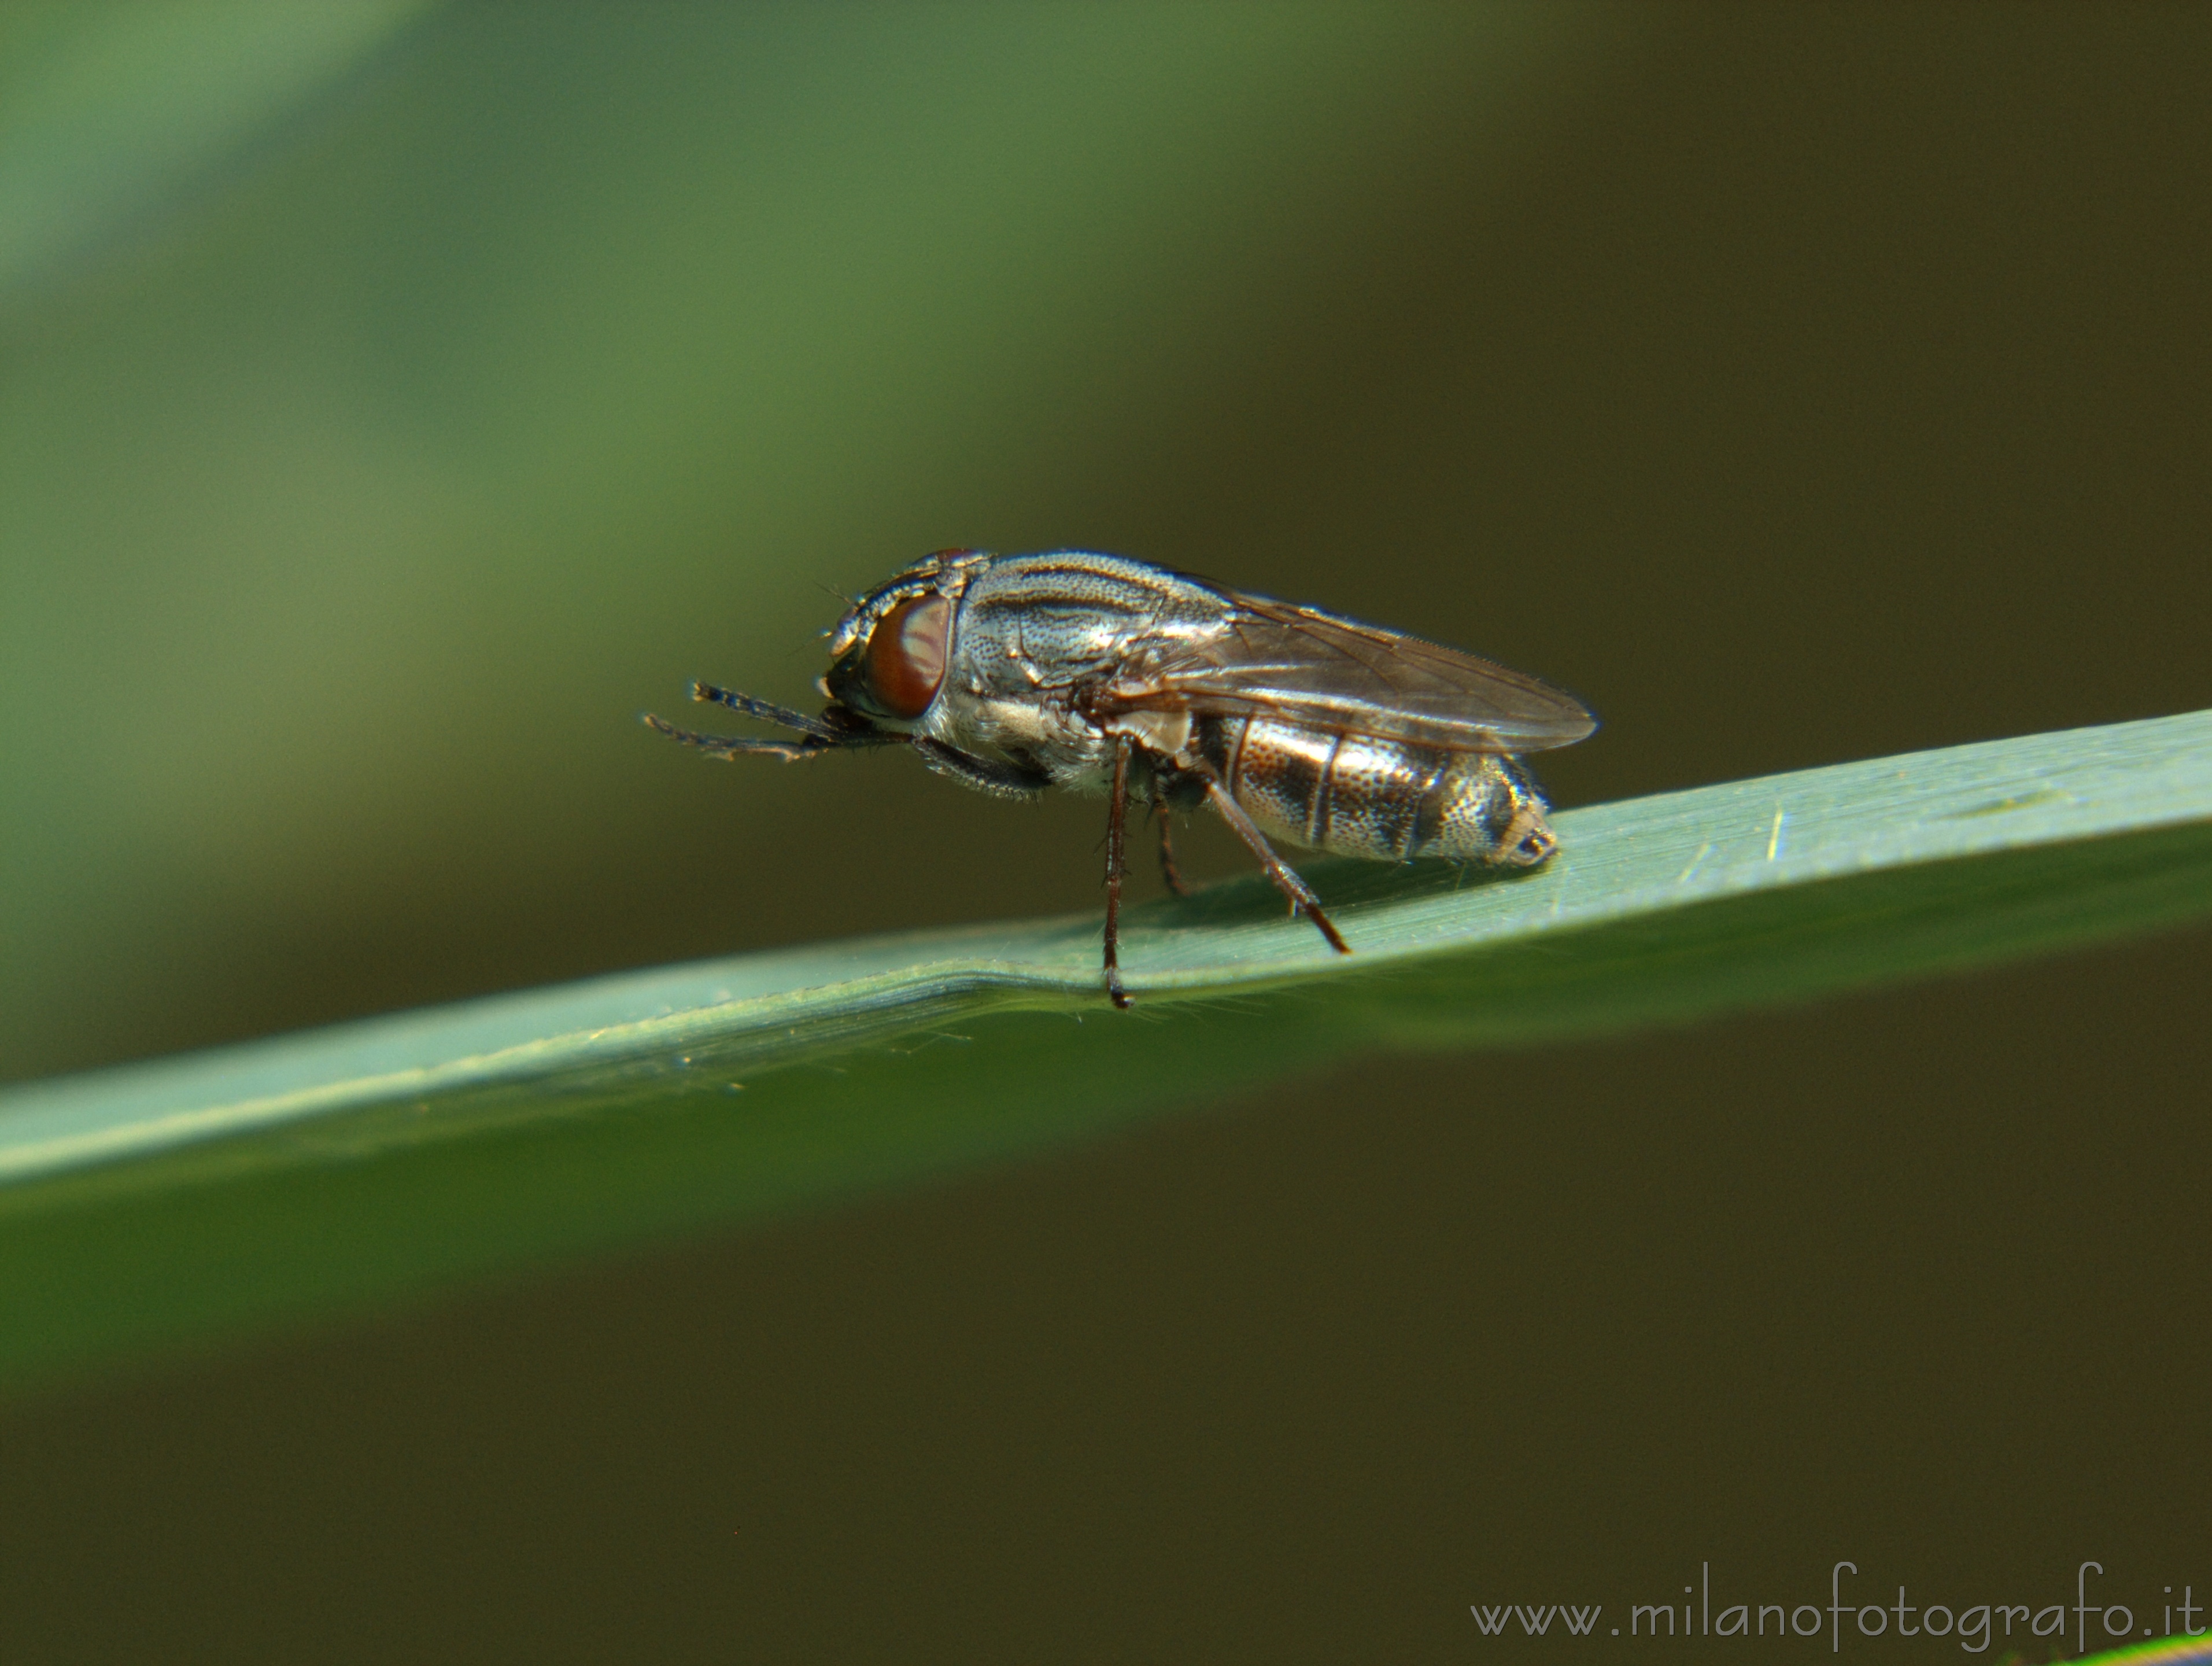 Cadrezzate (Varese, Italy): Fly of unidentified species - Cadrezzate (Varese, Italy)